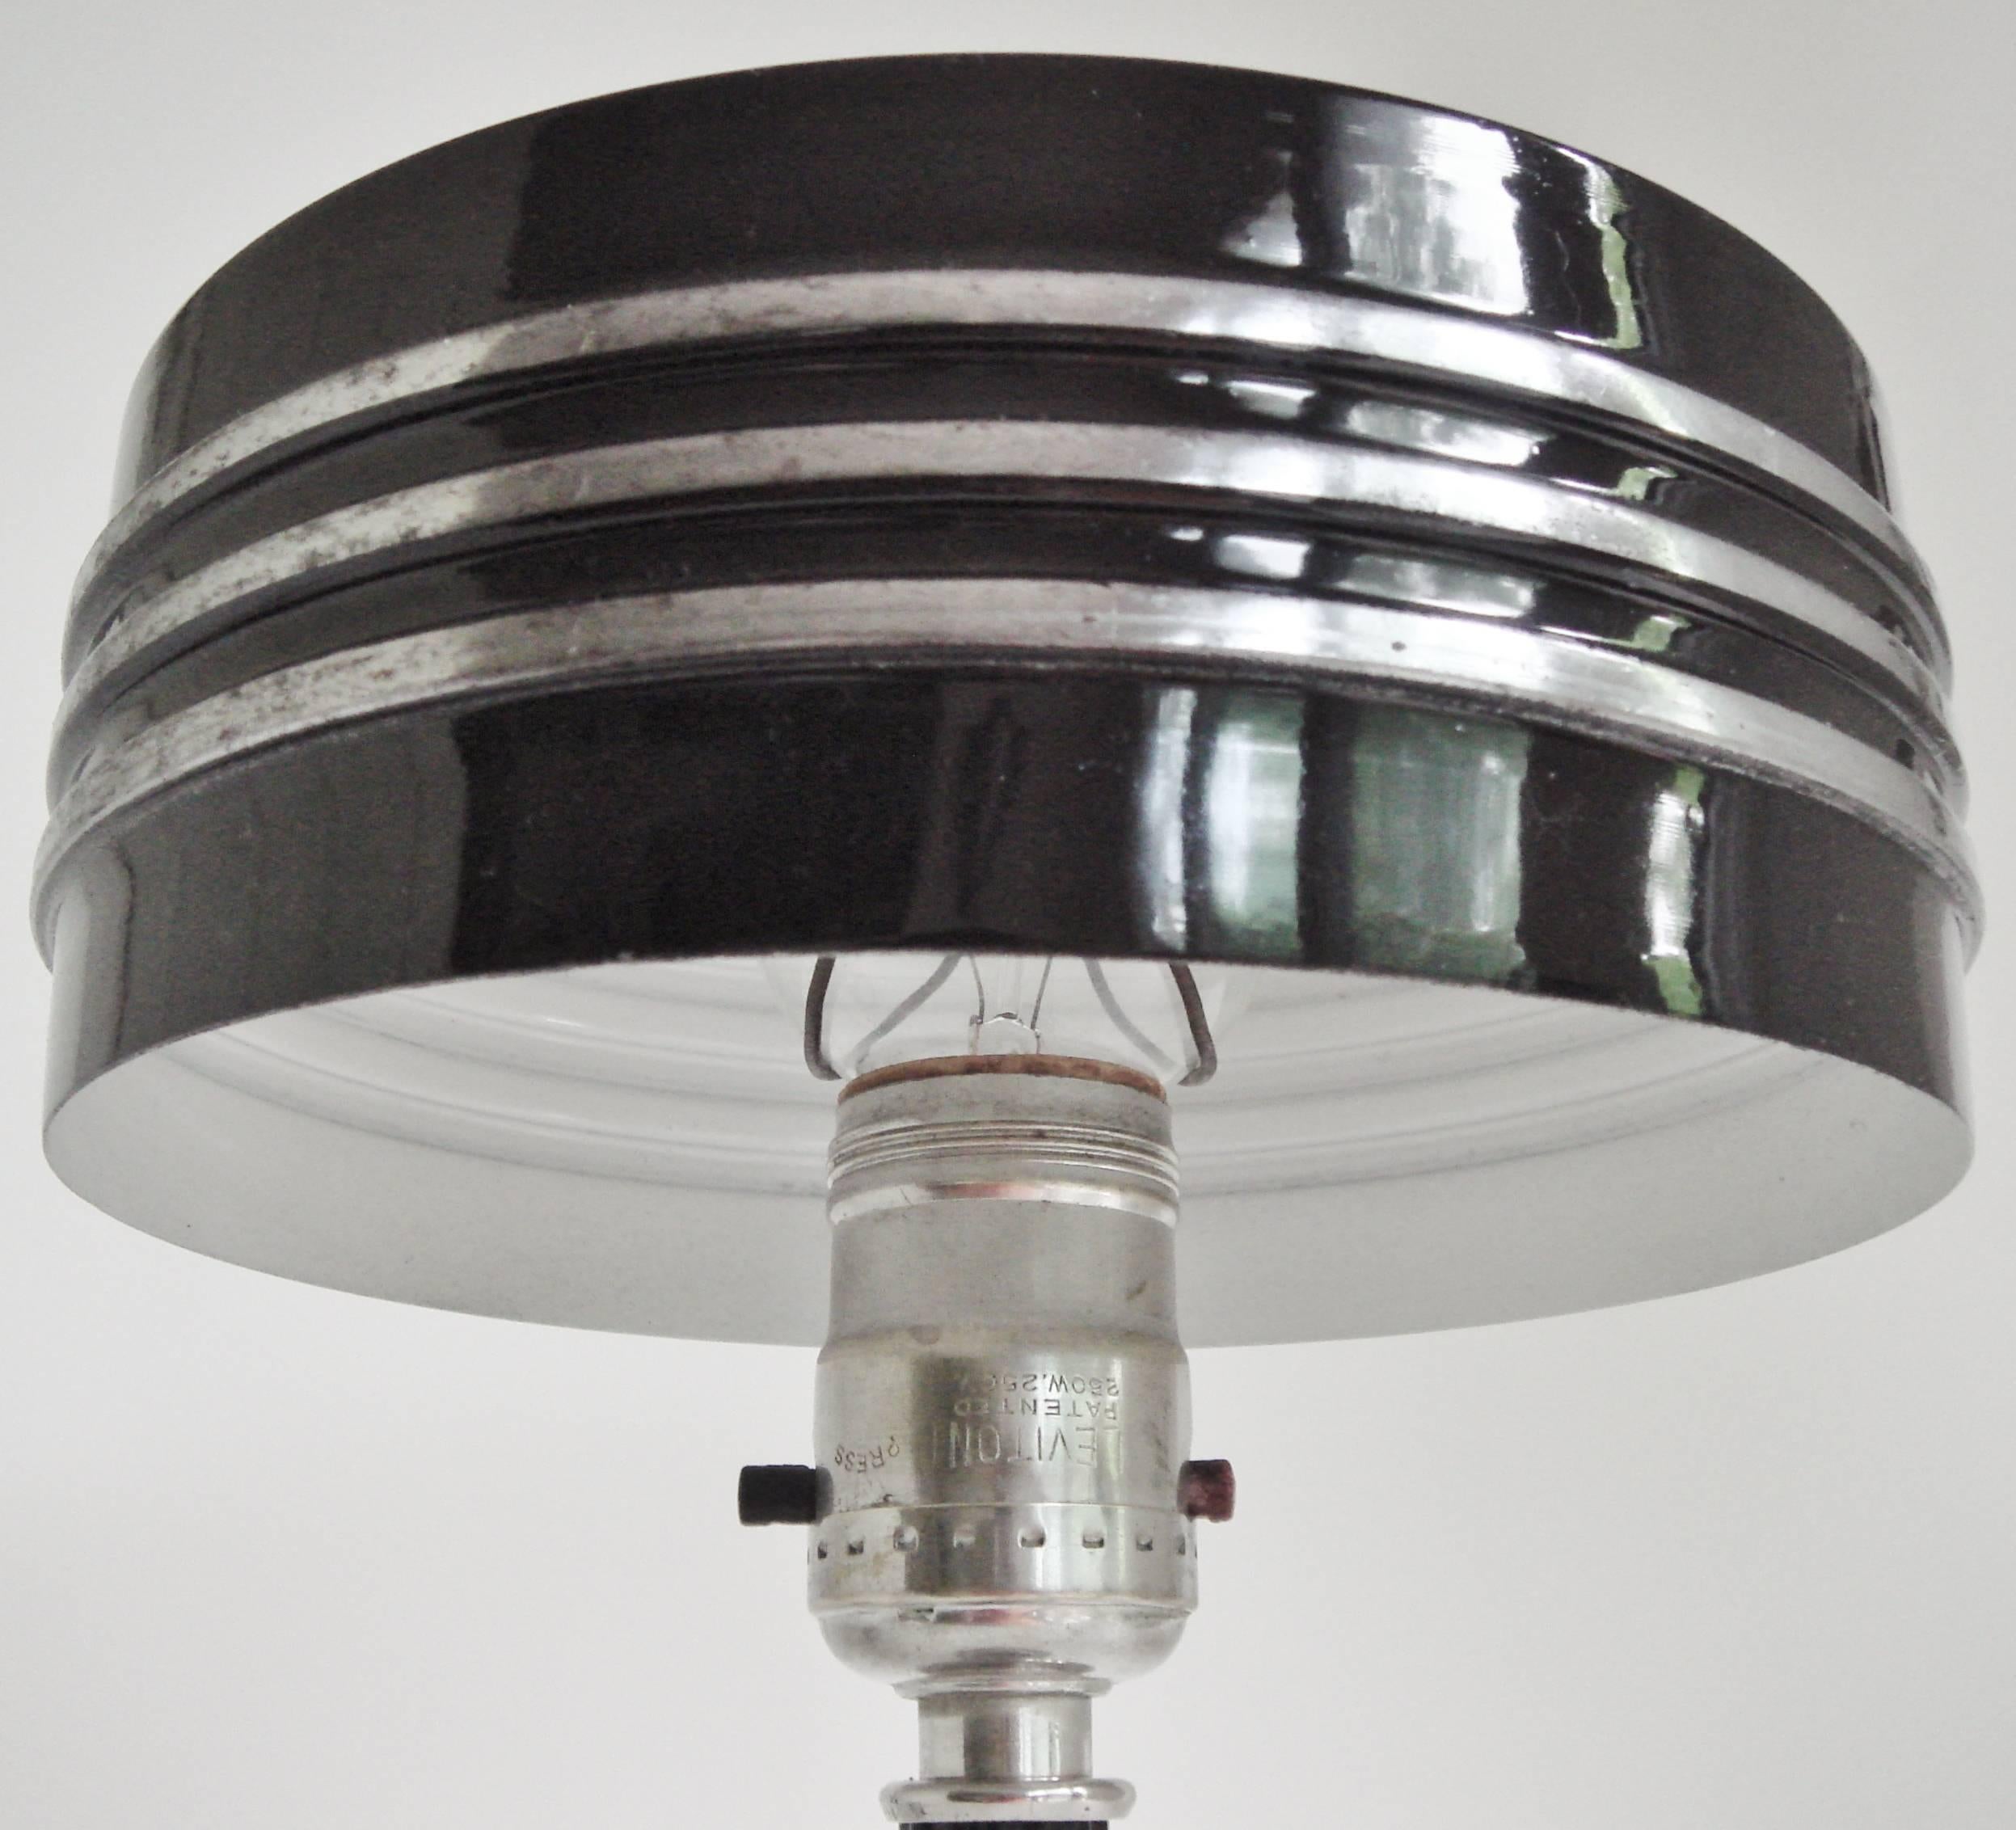 This rare American Art Deco chrome and black enamel table lamp is by the Markel Corporation of Buffalo, New York. It bears their distinctive signature chrome finial to the top of its triple banded drum shade. It has a stepped fluted shaft with